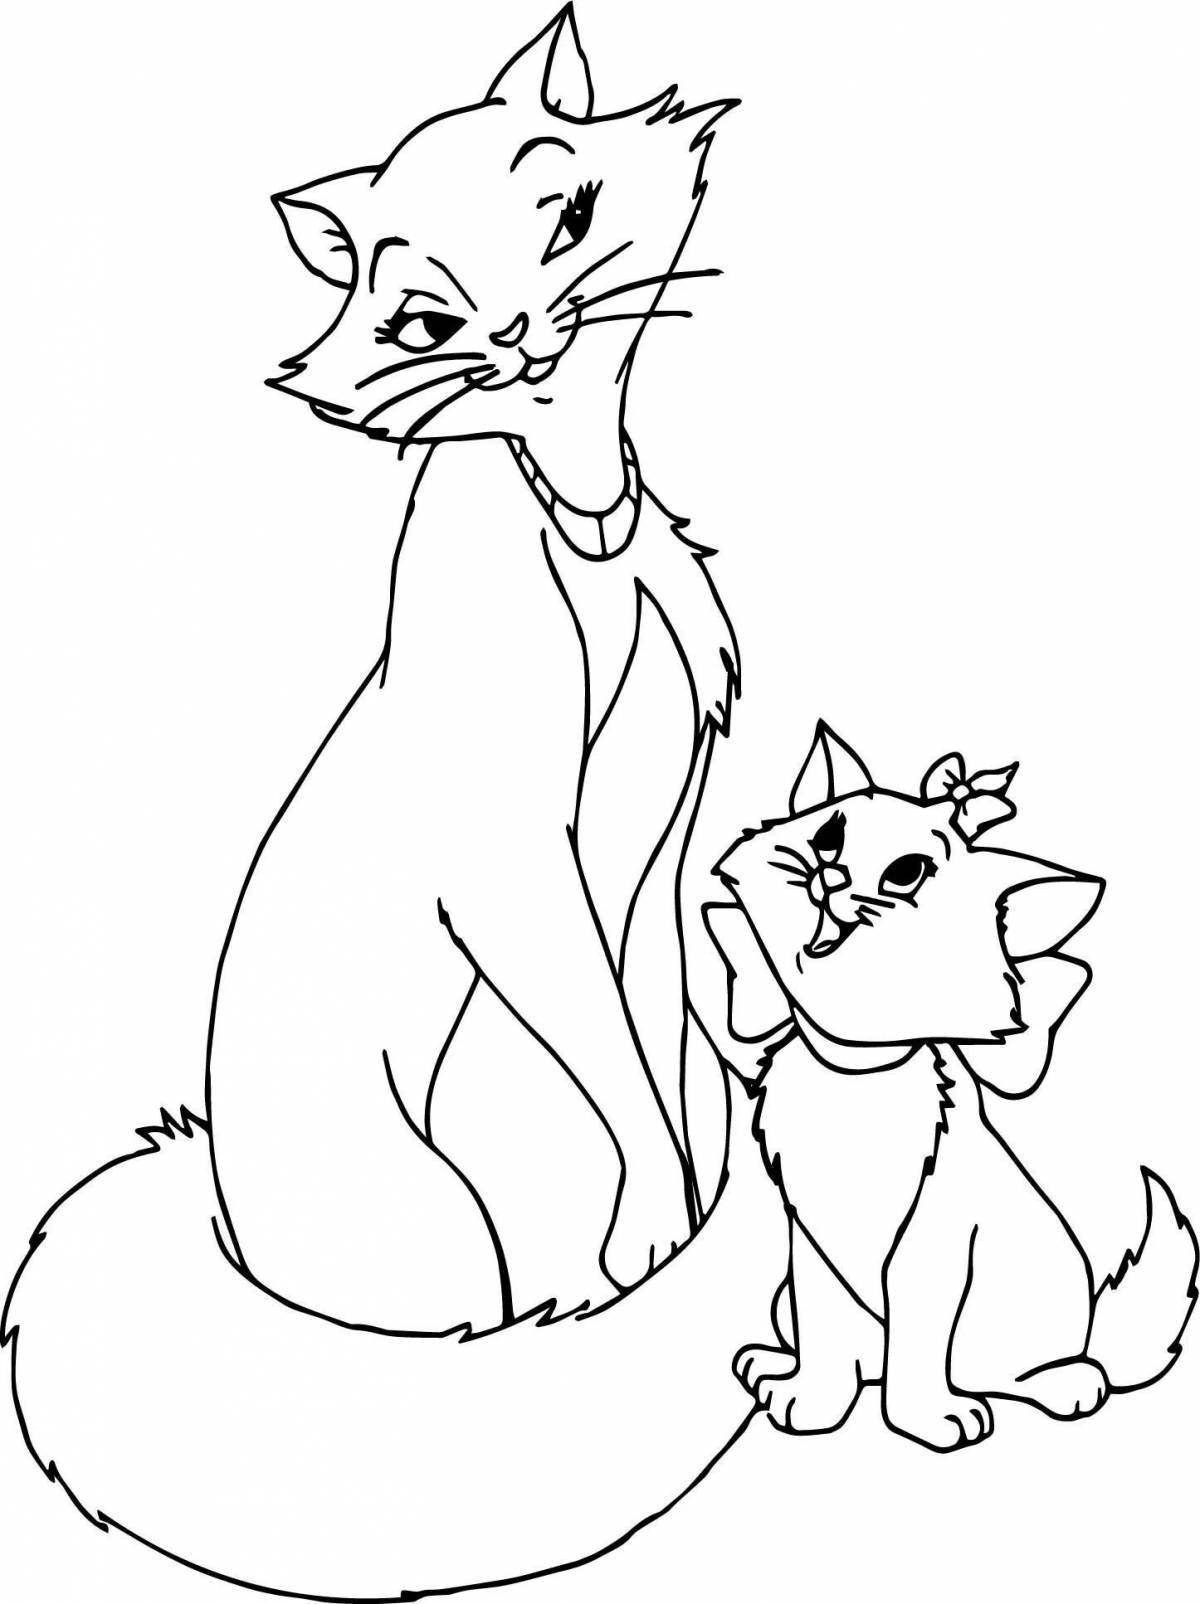 Coloring page graceful mother cat